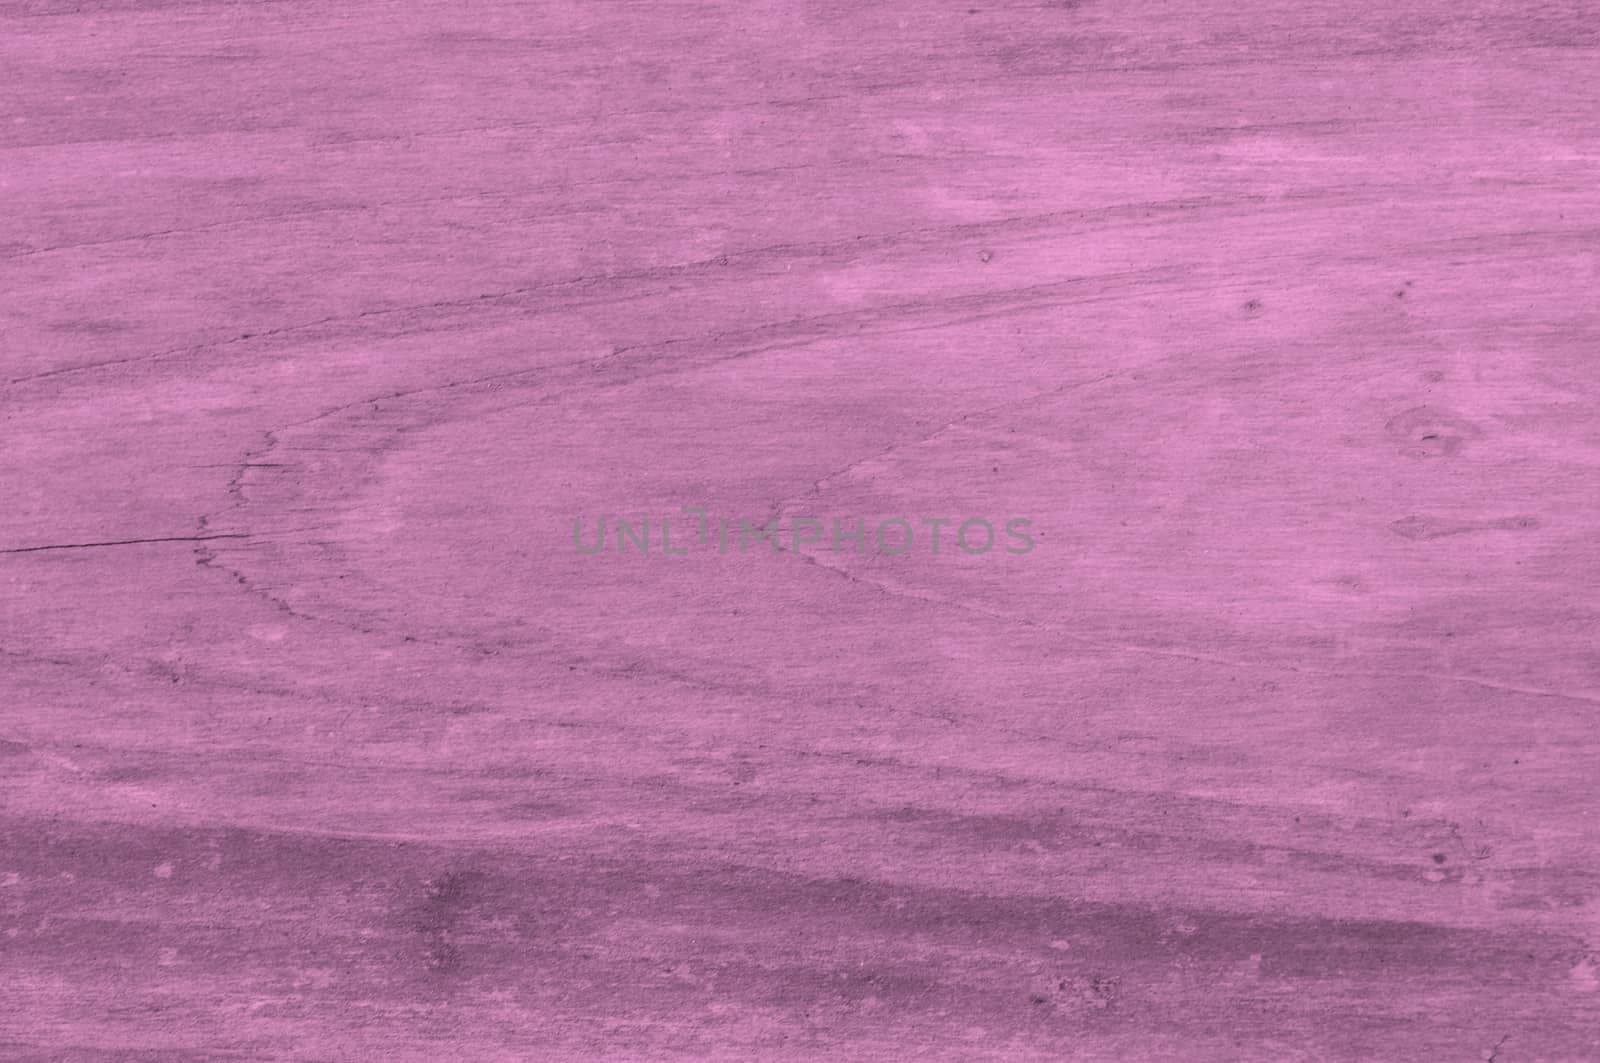 a pink background of distressed or grunge wood